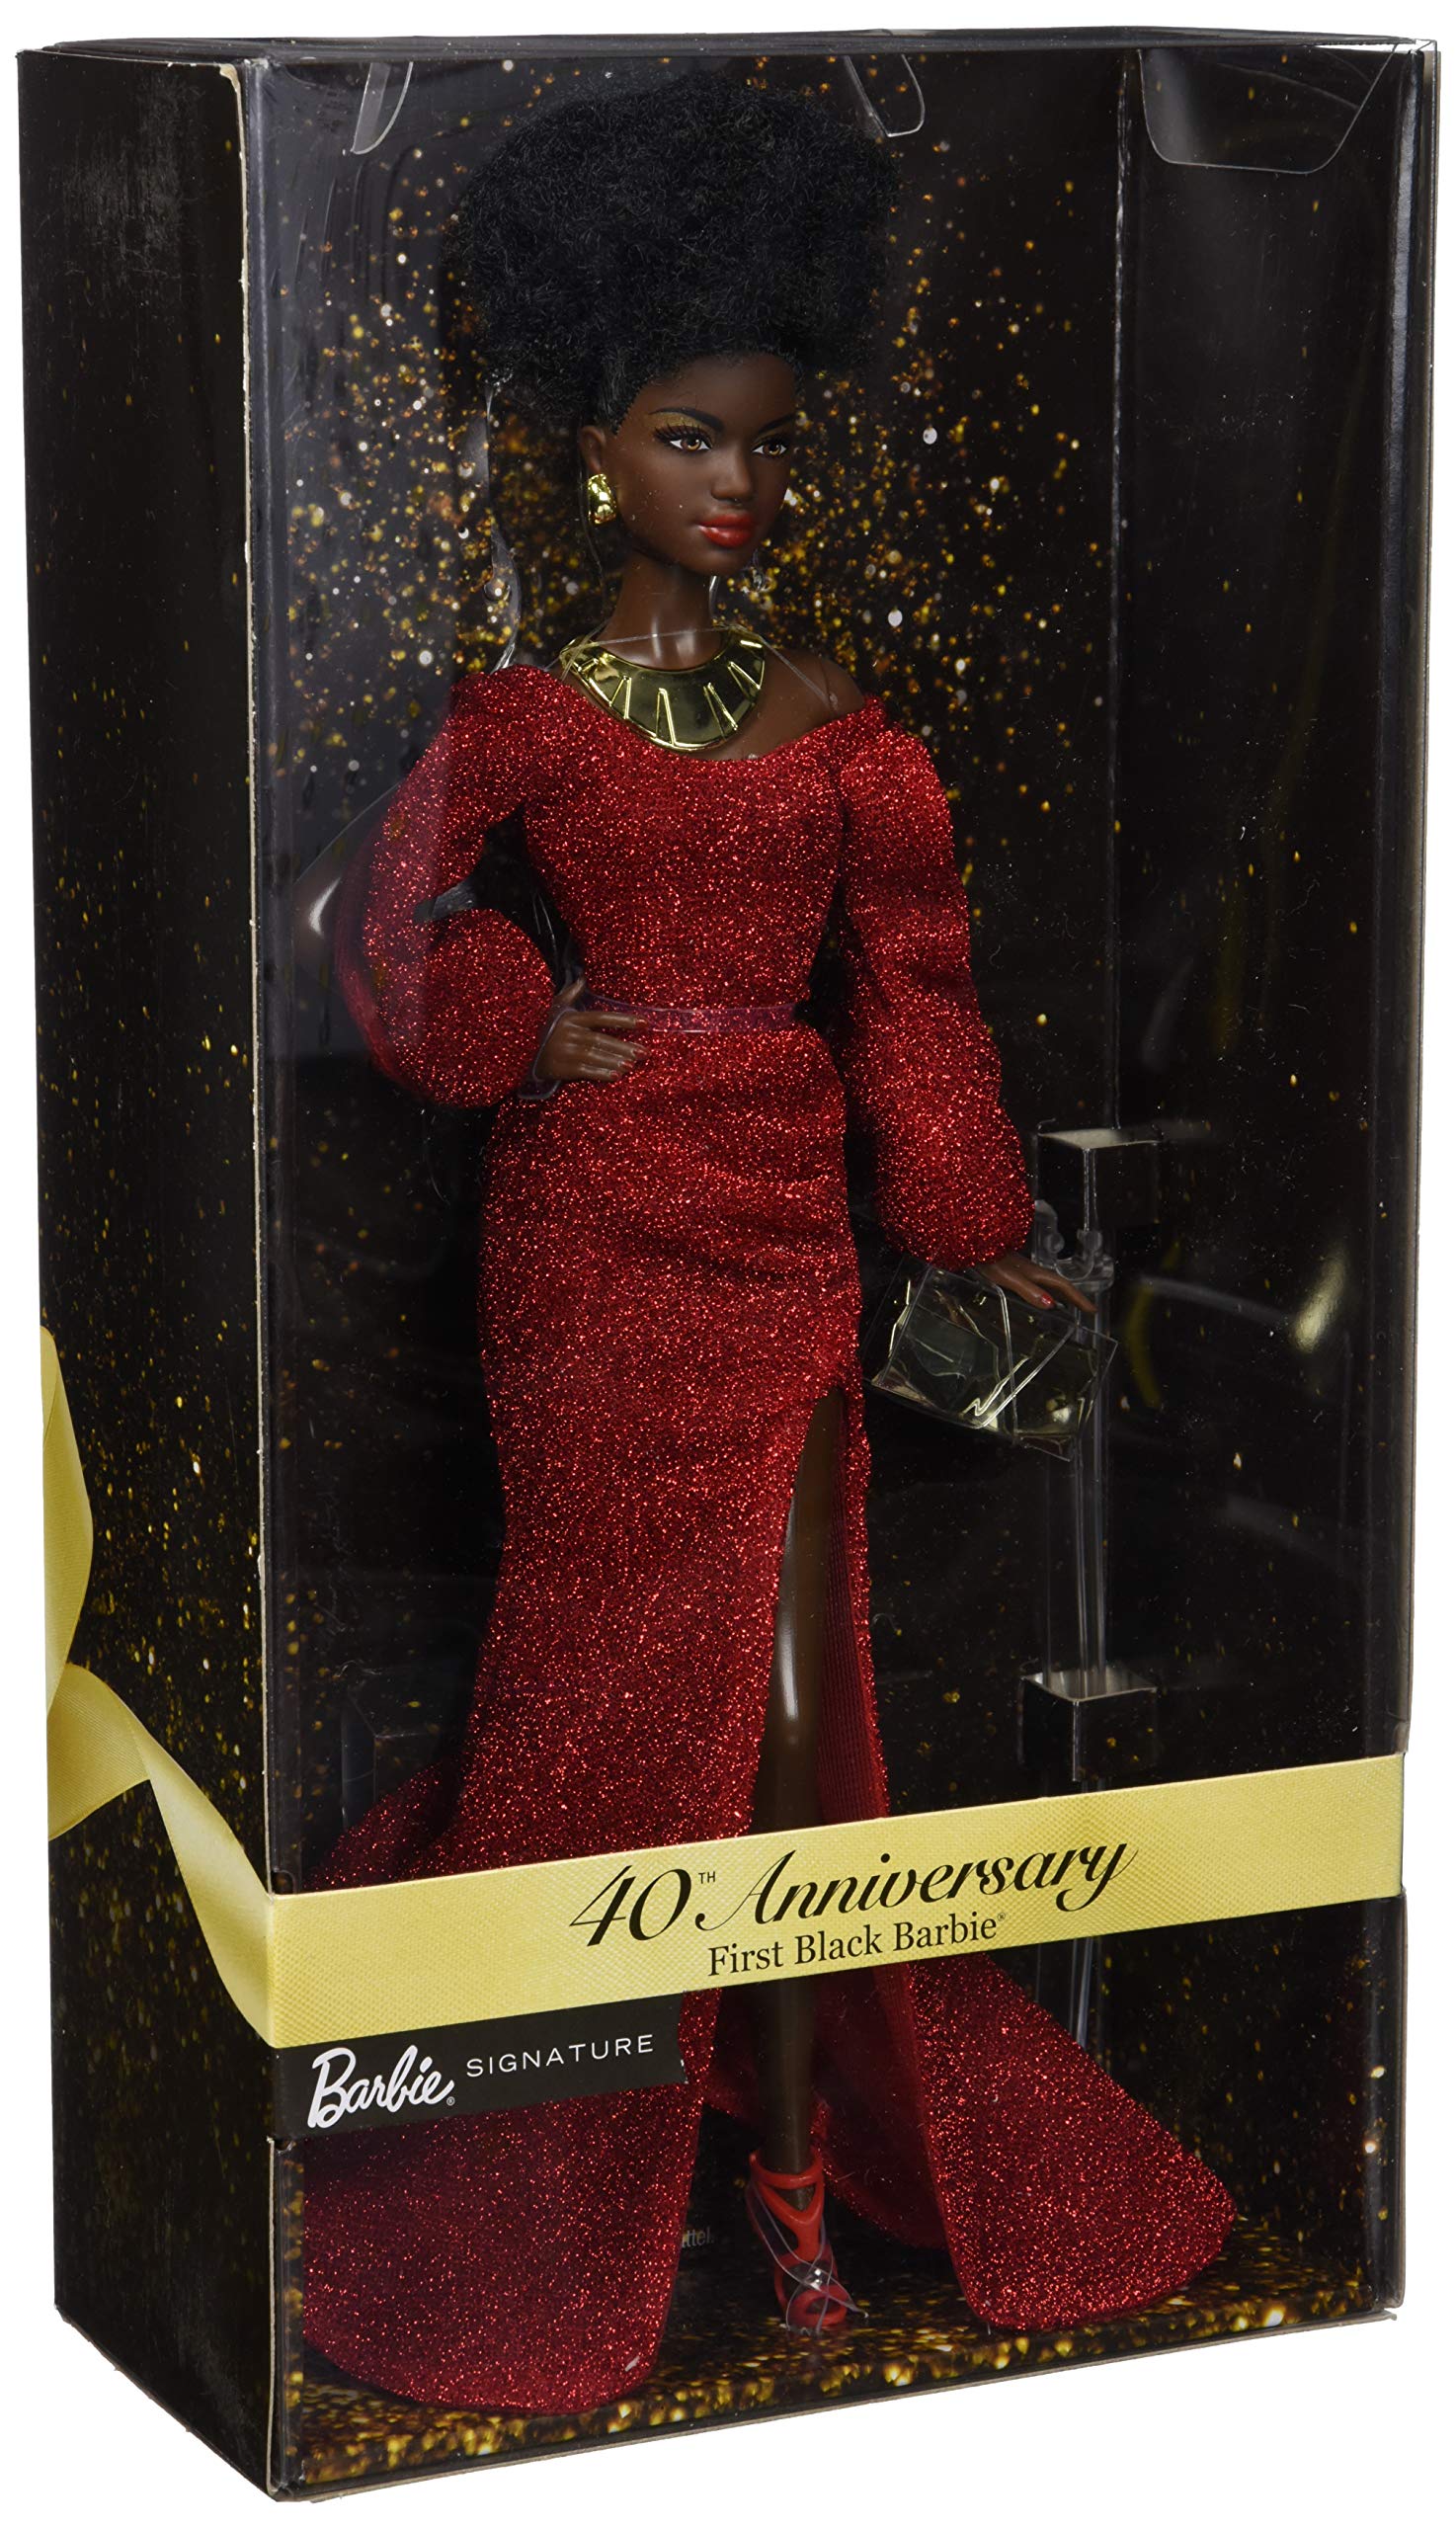 Barbie 40th Anniversary First Black Barbie doll. First images of the